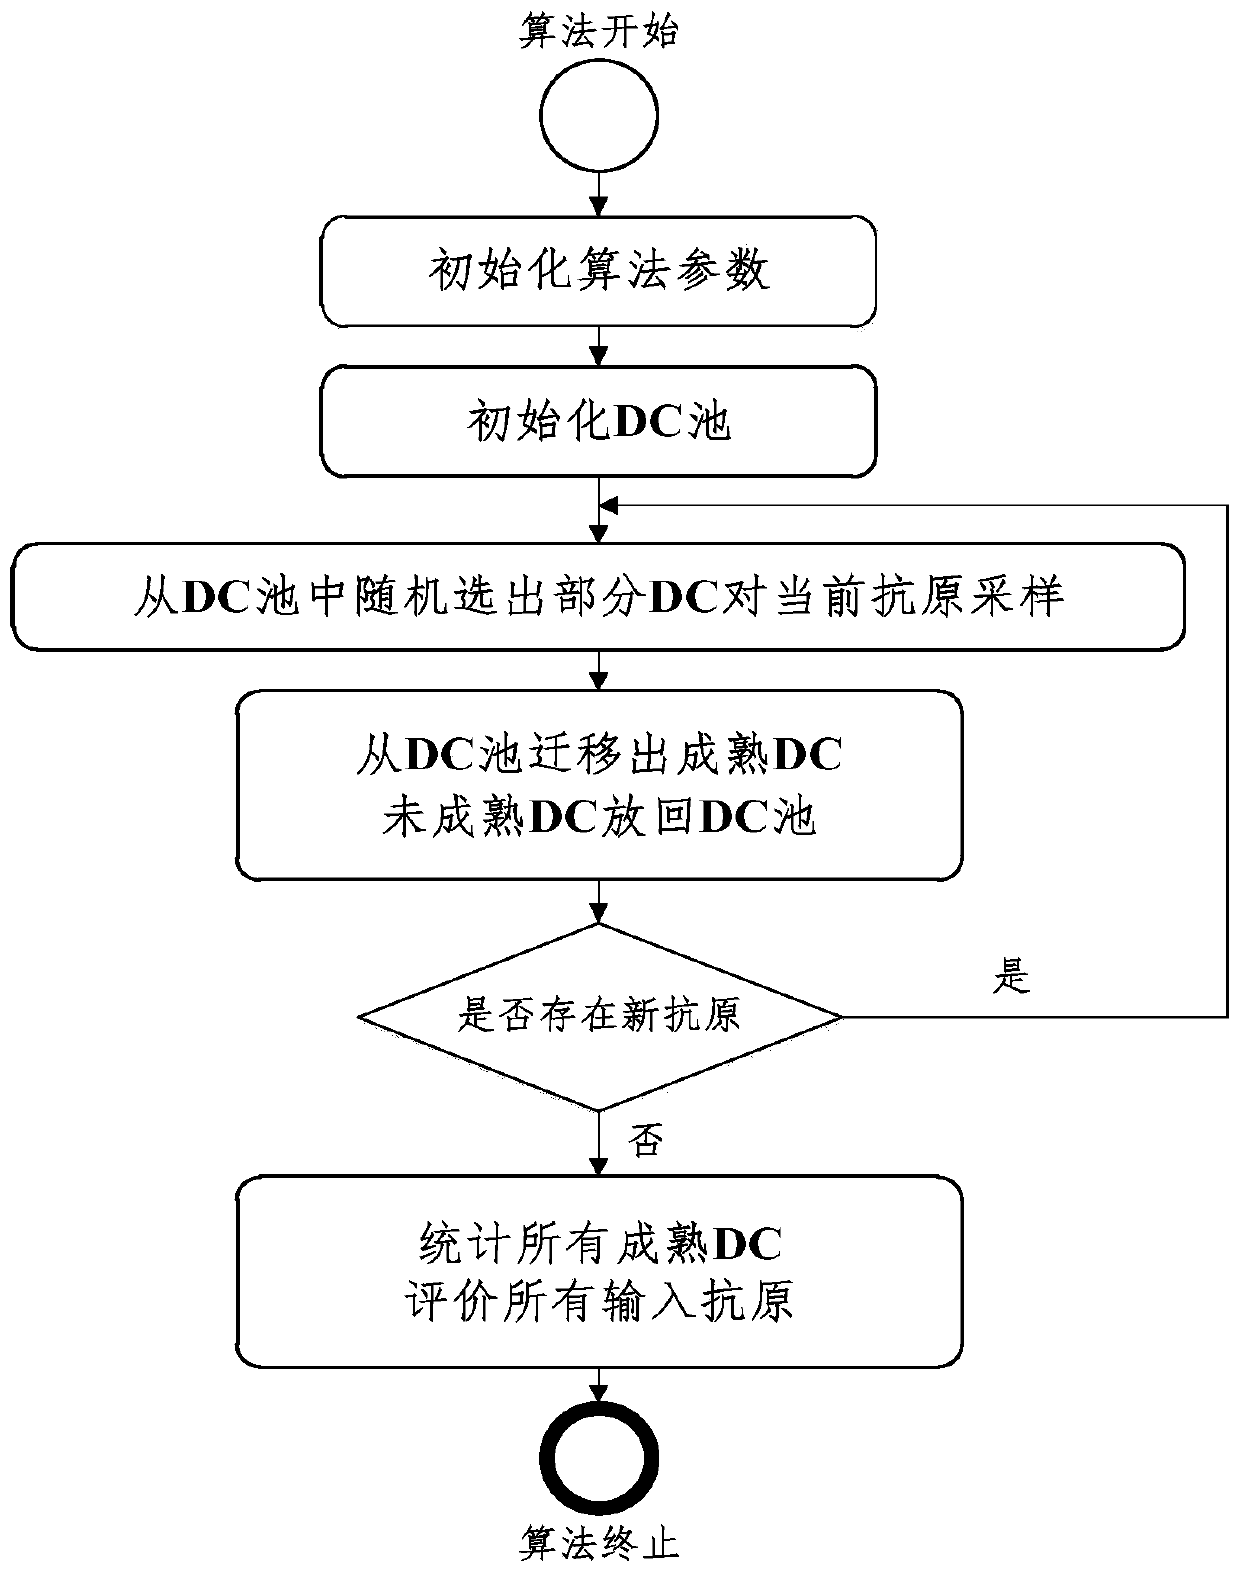 Detection method and system of Weibo water army based on artificial immune risk theory